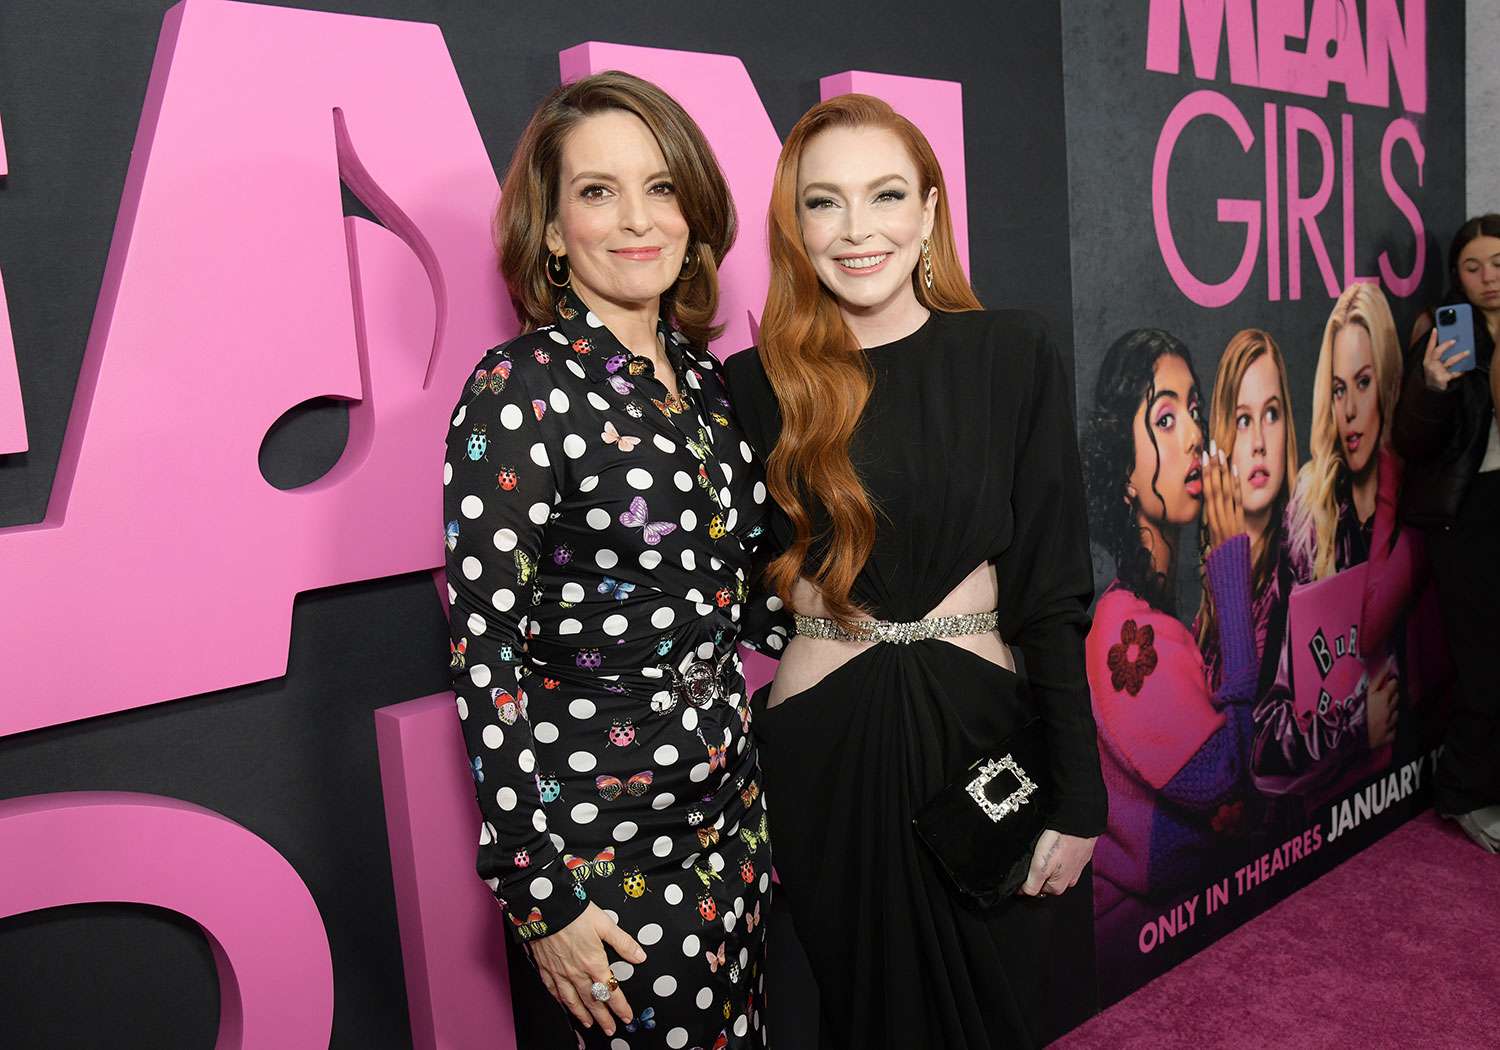 Lindsay Lohan Wows in Red Carpet Return at "Mean Girls" Premiere